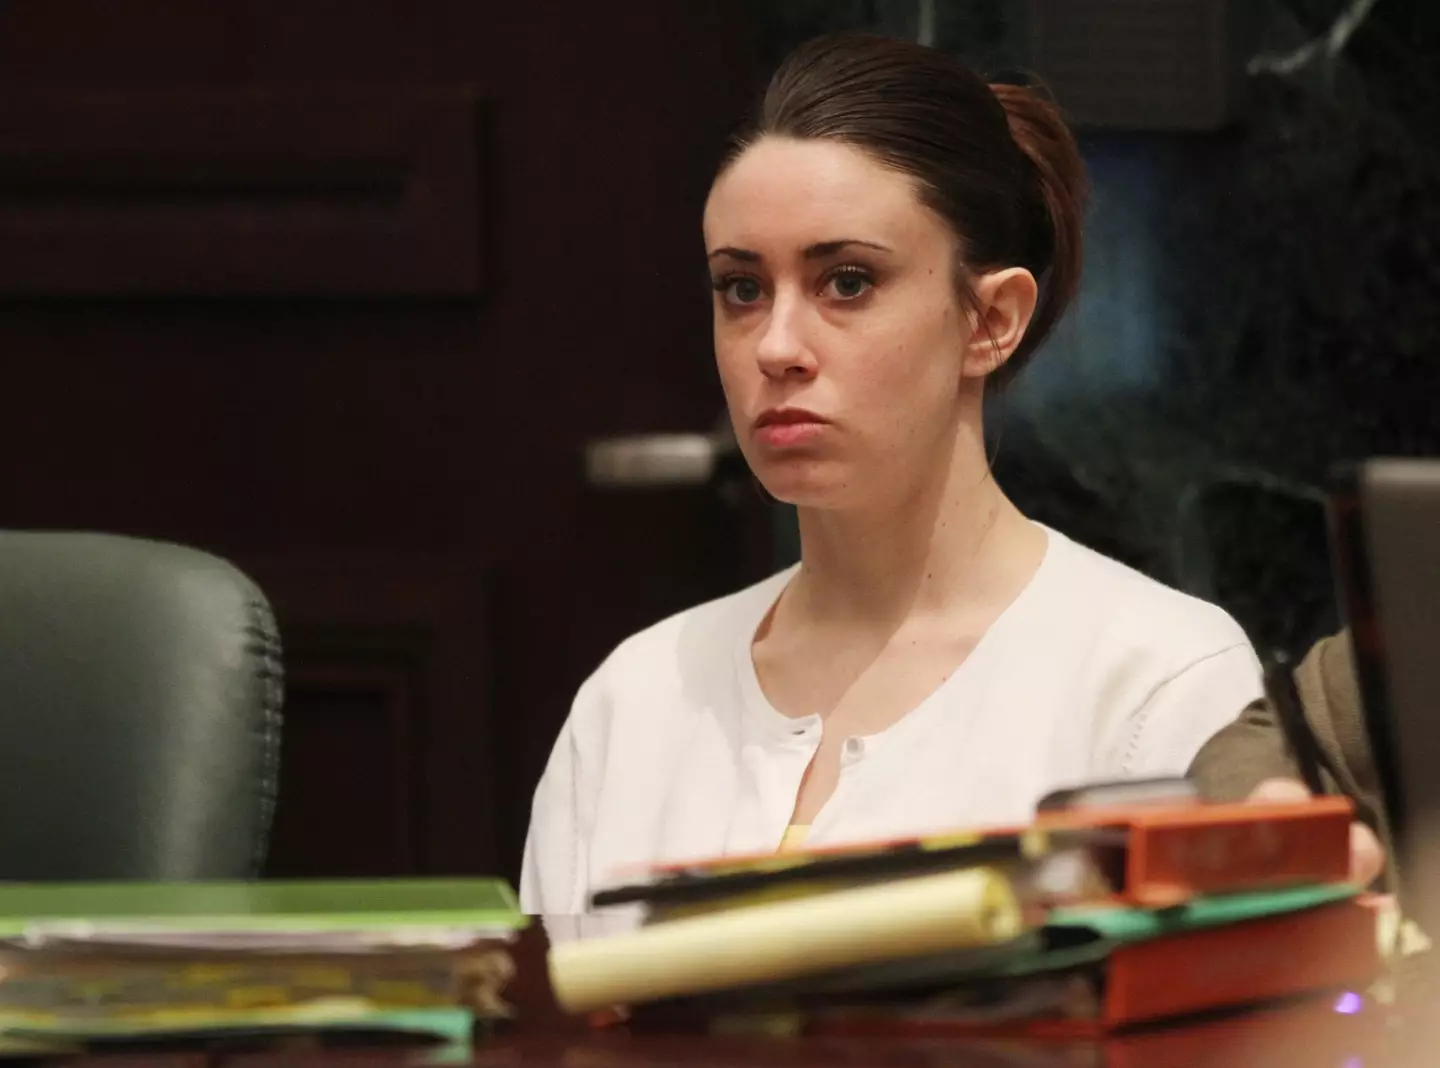 Casey Anthony pictured in court in 2011.